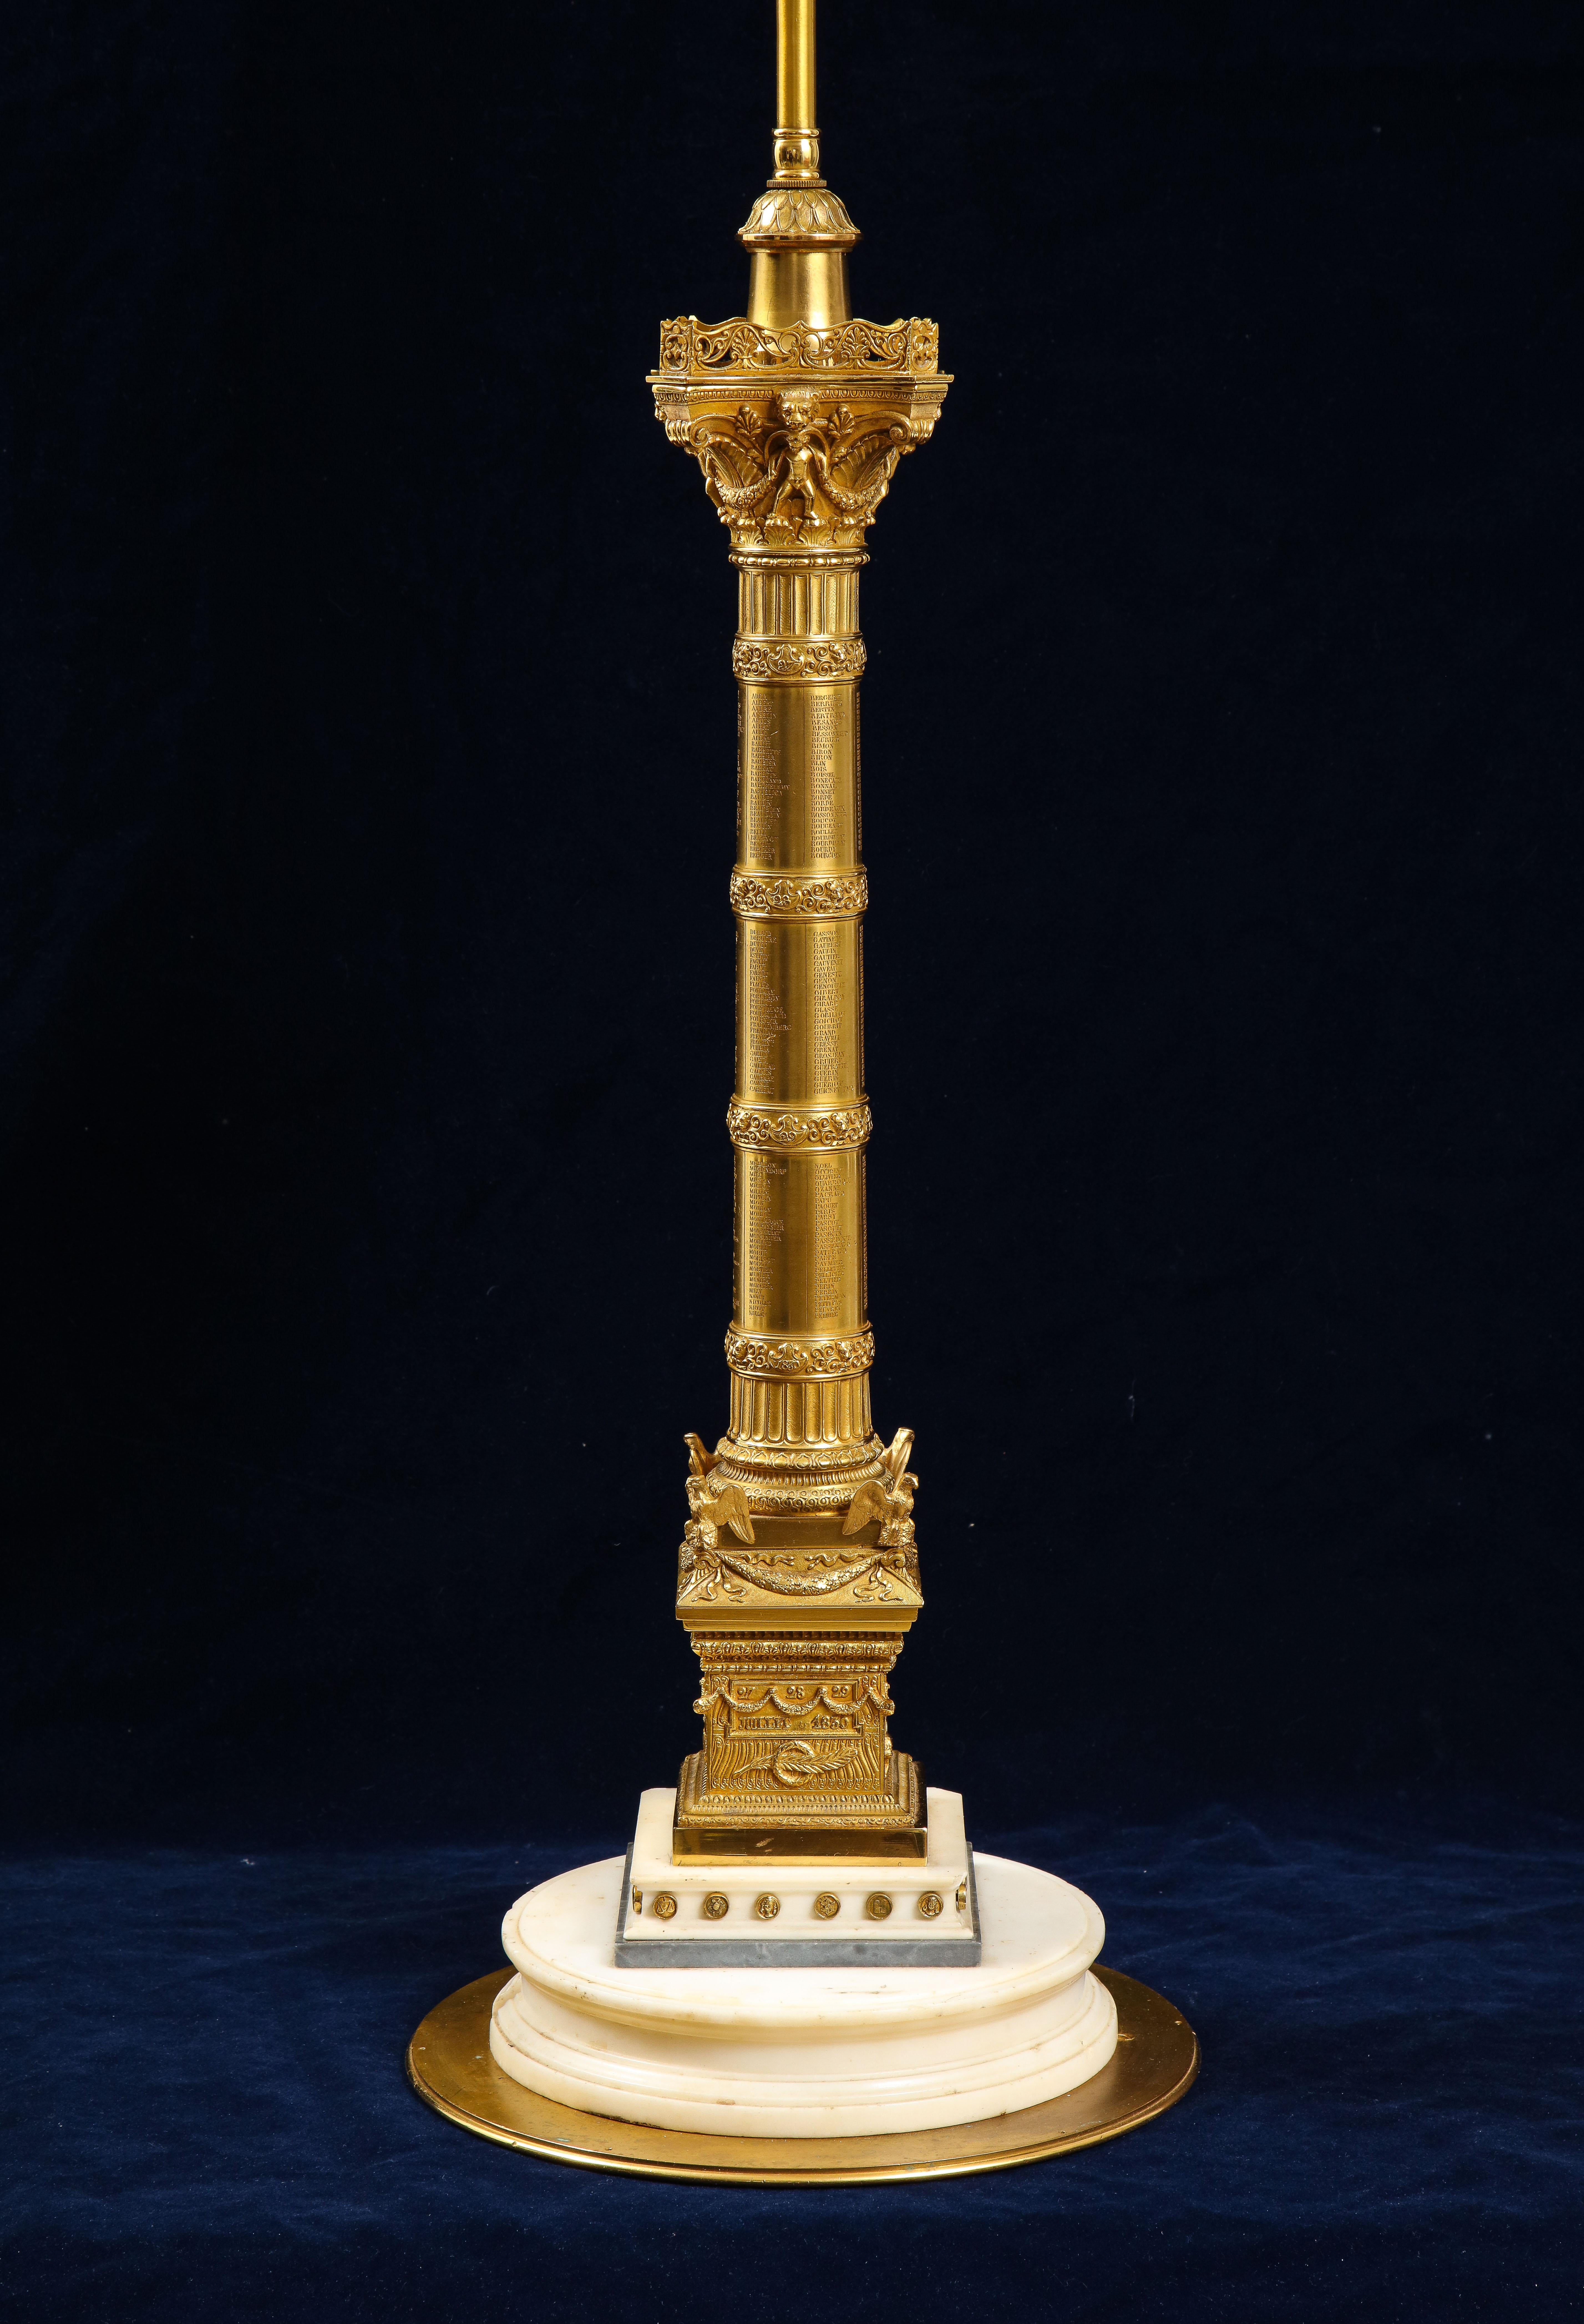 Mid-19th Century 19th C. French Grand Tour Dore Bronze Colonne de Juillet Mounted as a Lamp For Sale